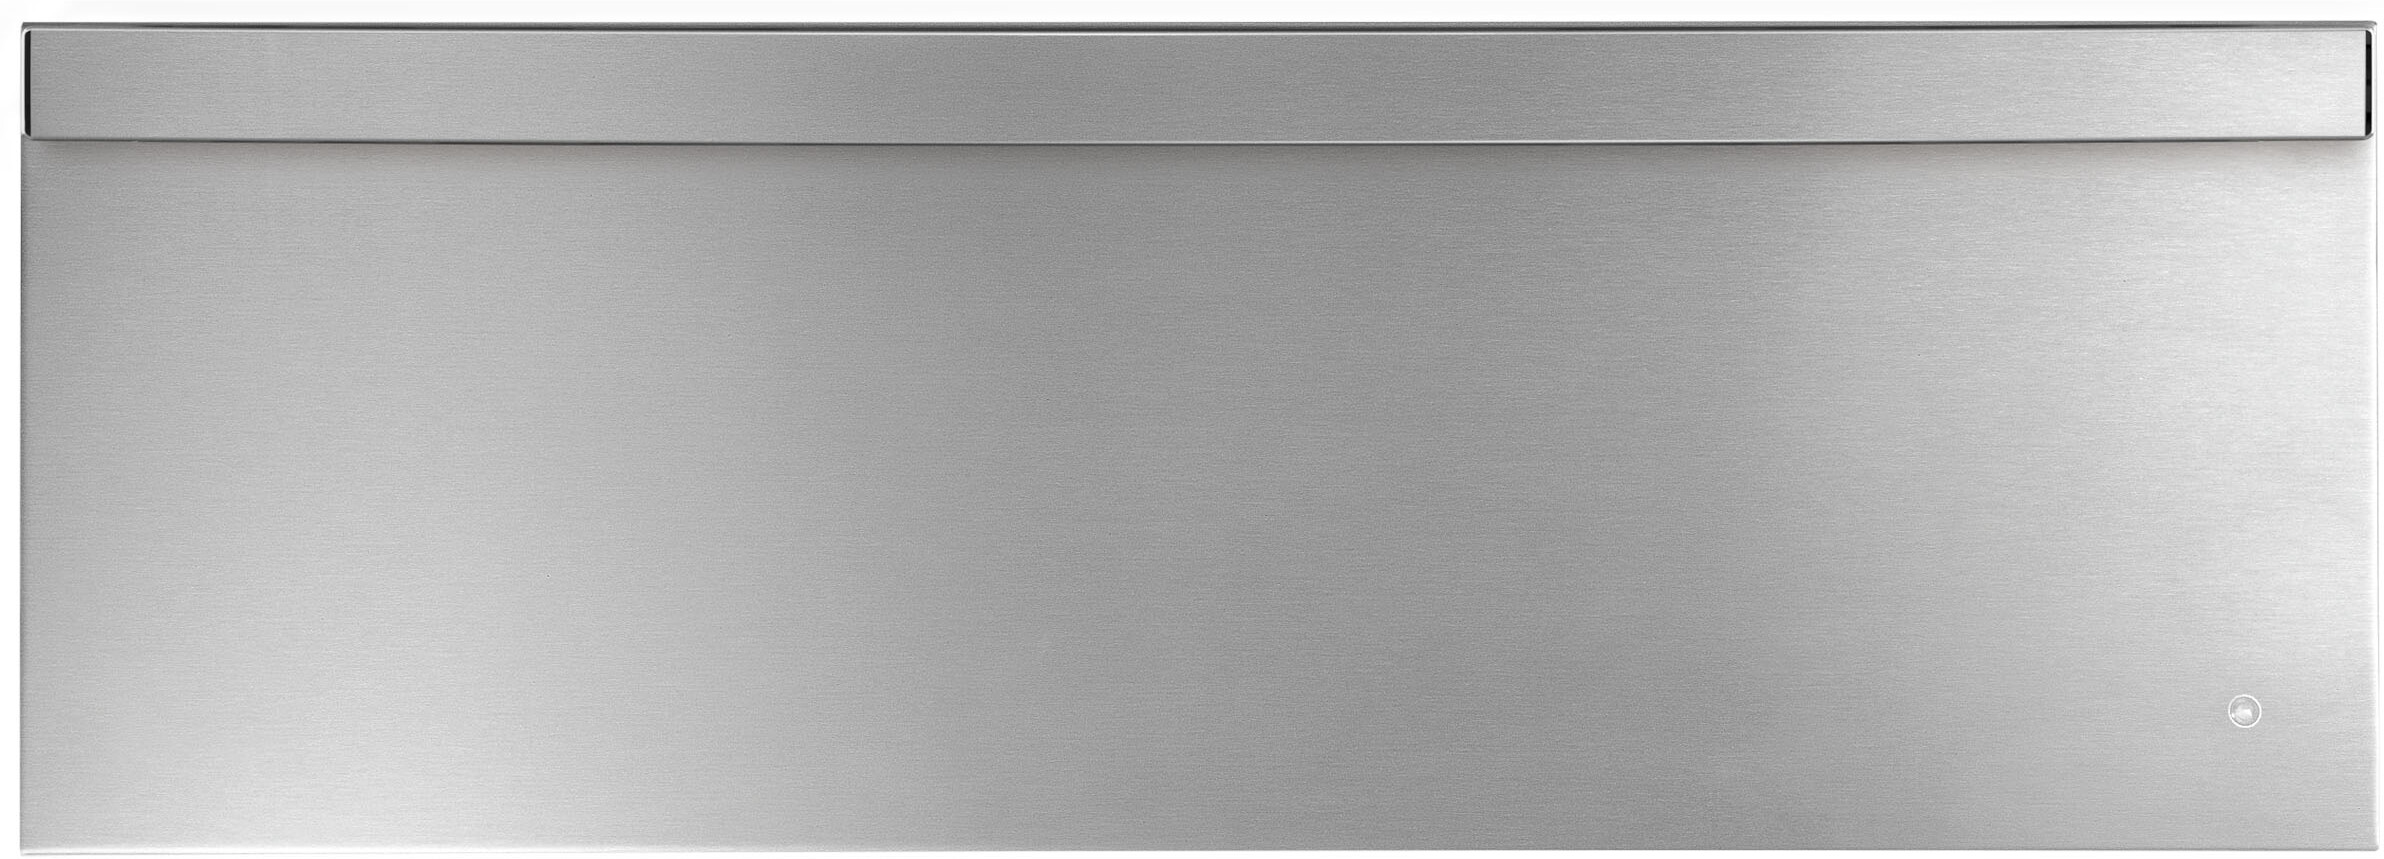 GE 30 Electric Warming Drawer PTW9000SPSS